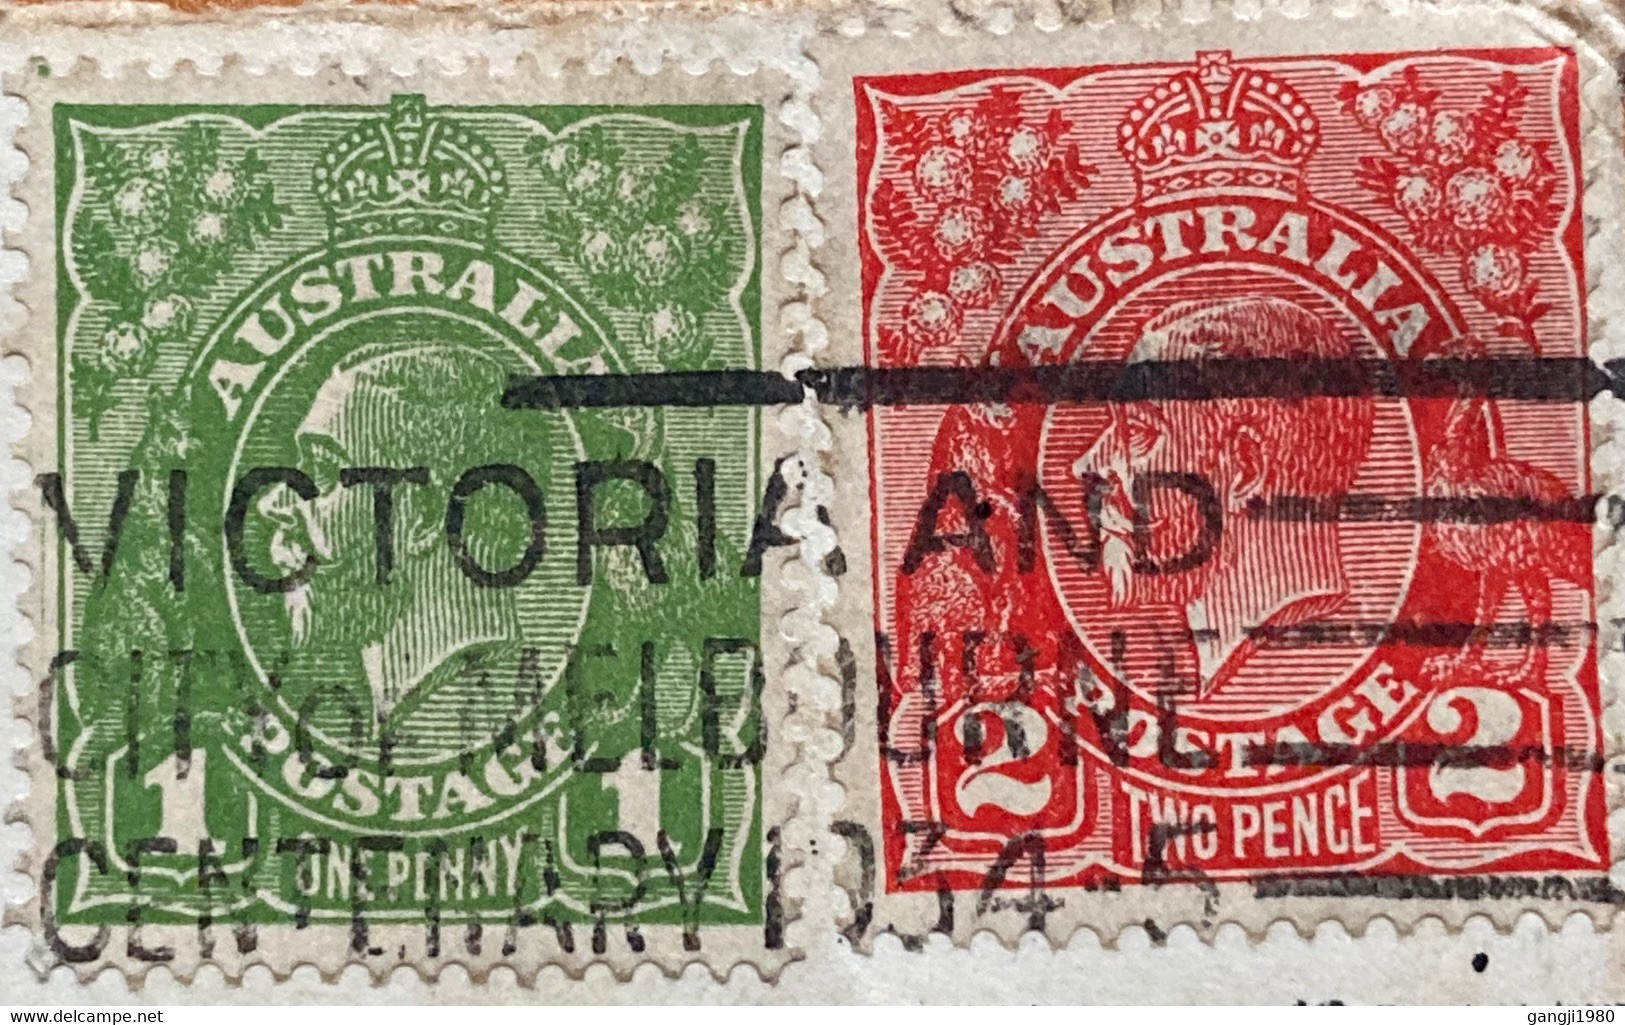 AUSTRALIA 1934, KING GEORGE 2 STAMPS,SLOGAN VICTORIA & CITY MELBOURNE CENTENARY-1934 WITH SPECIAL PREPRINTED USED COVER - Brieven En Documenten